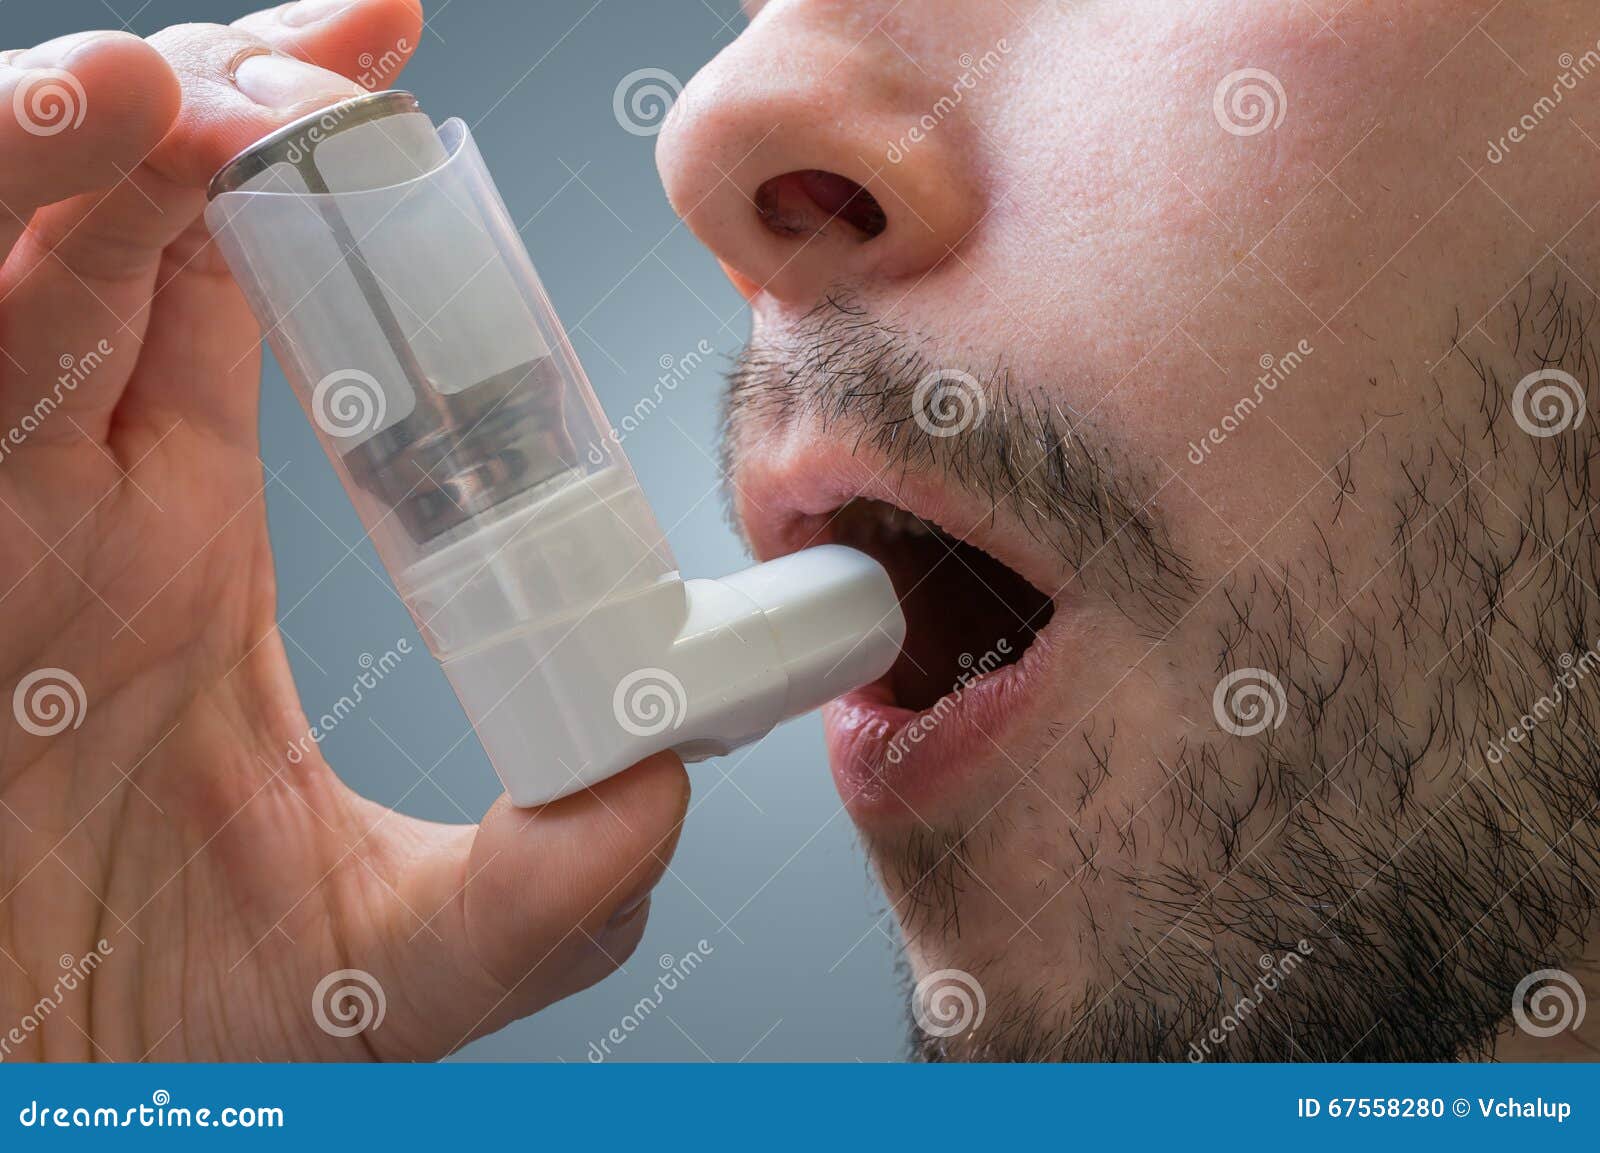 asthmatic man suffers from asthma and is using inhaler